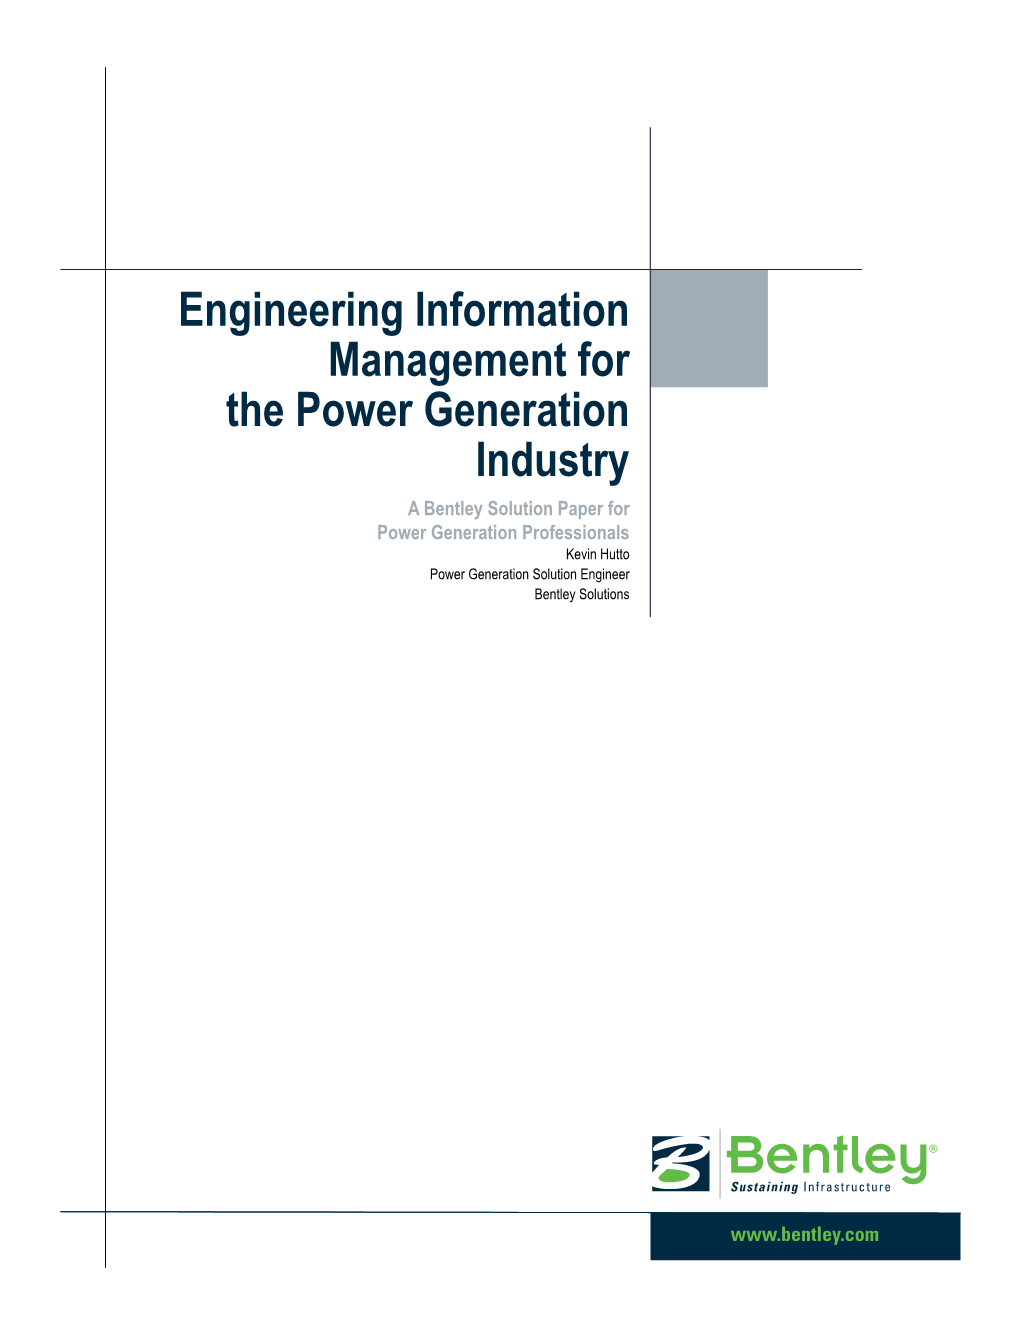 Engineering Information Management for the Power